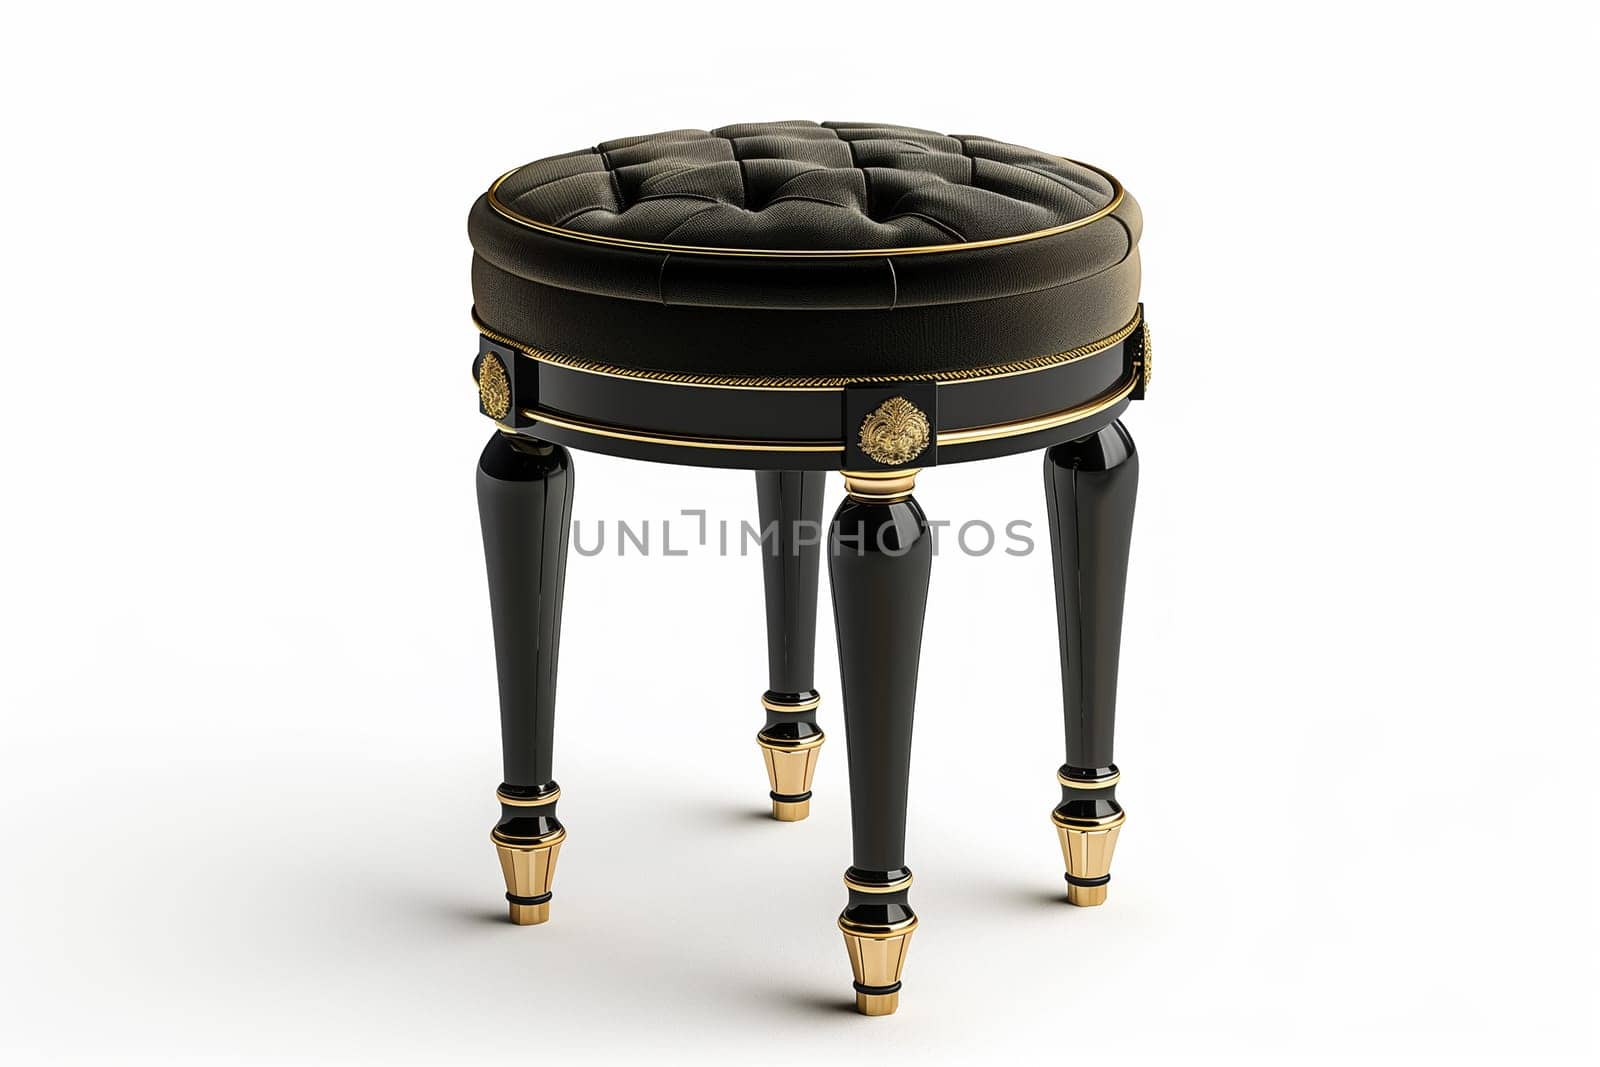 A stool in striking black and gold colors with intricate gold trimmings, adding a luxurious touch to any space.